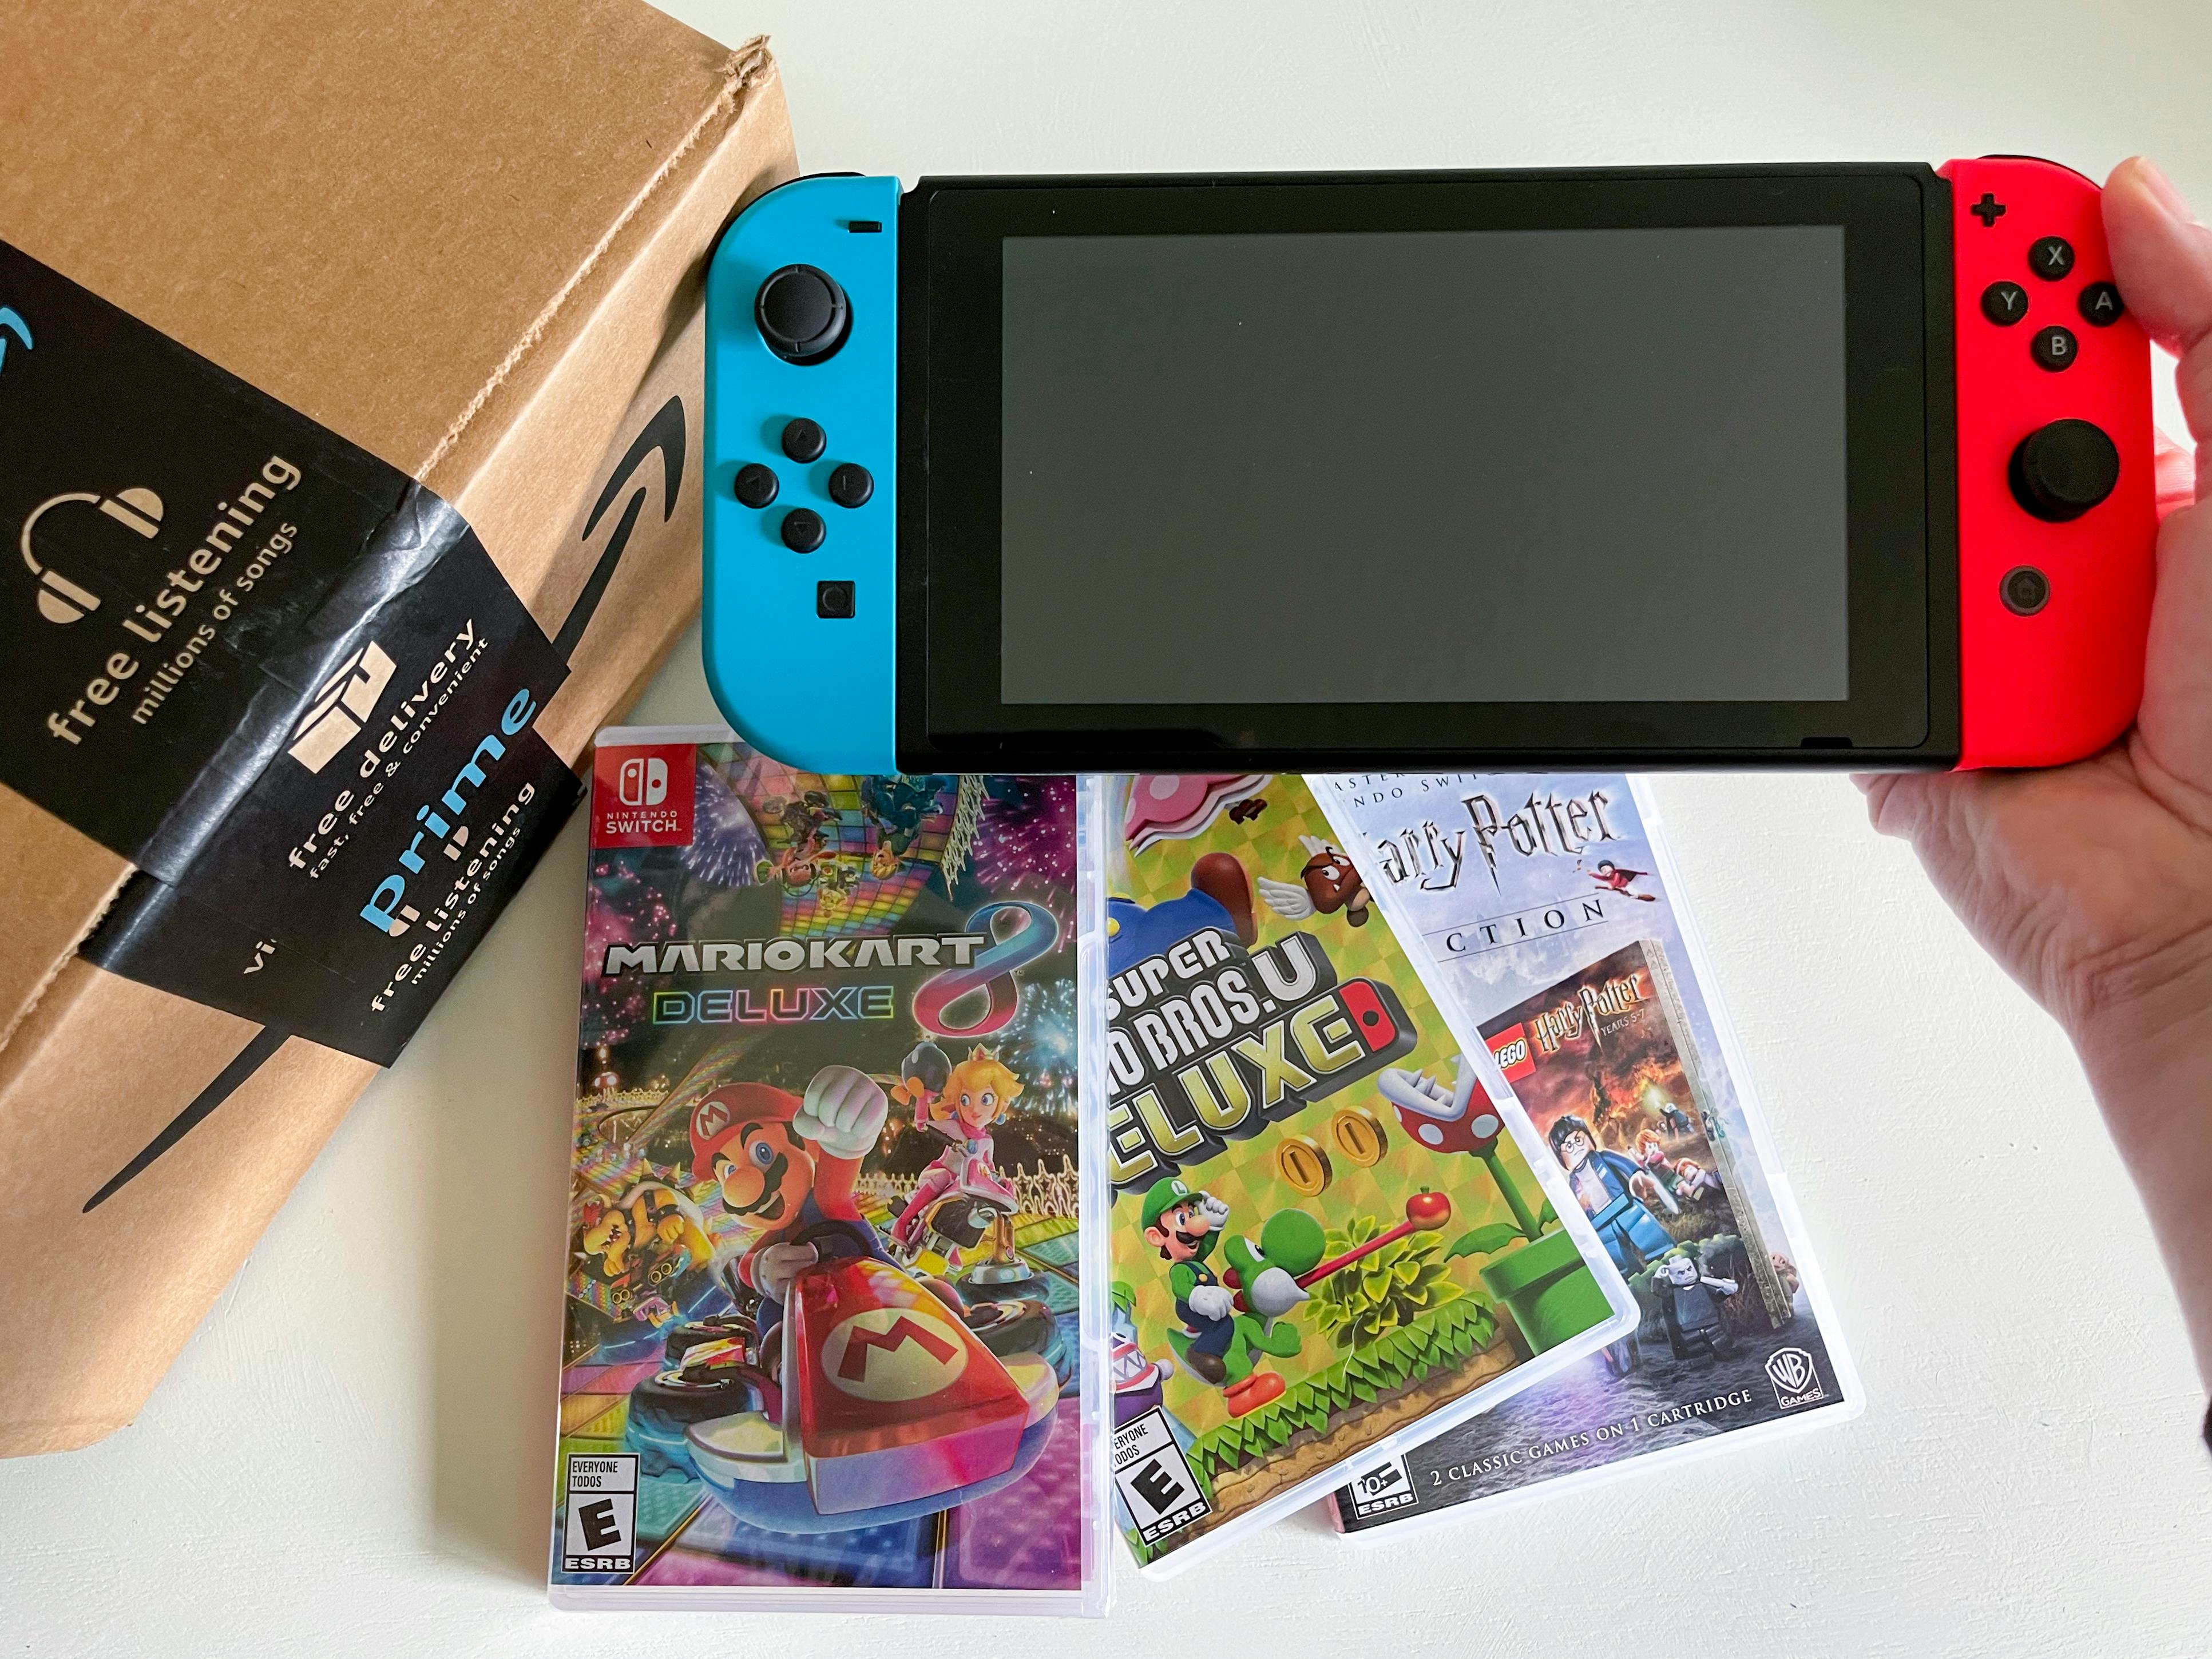 A person's hand holding up a Nintendo Switch next to an Amazon box with three Switch games below it.